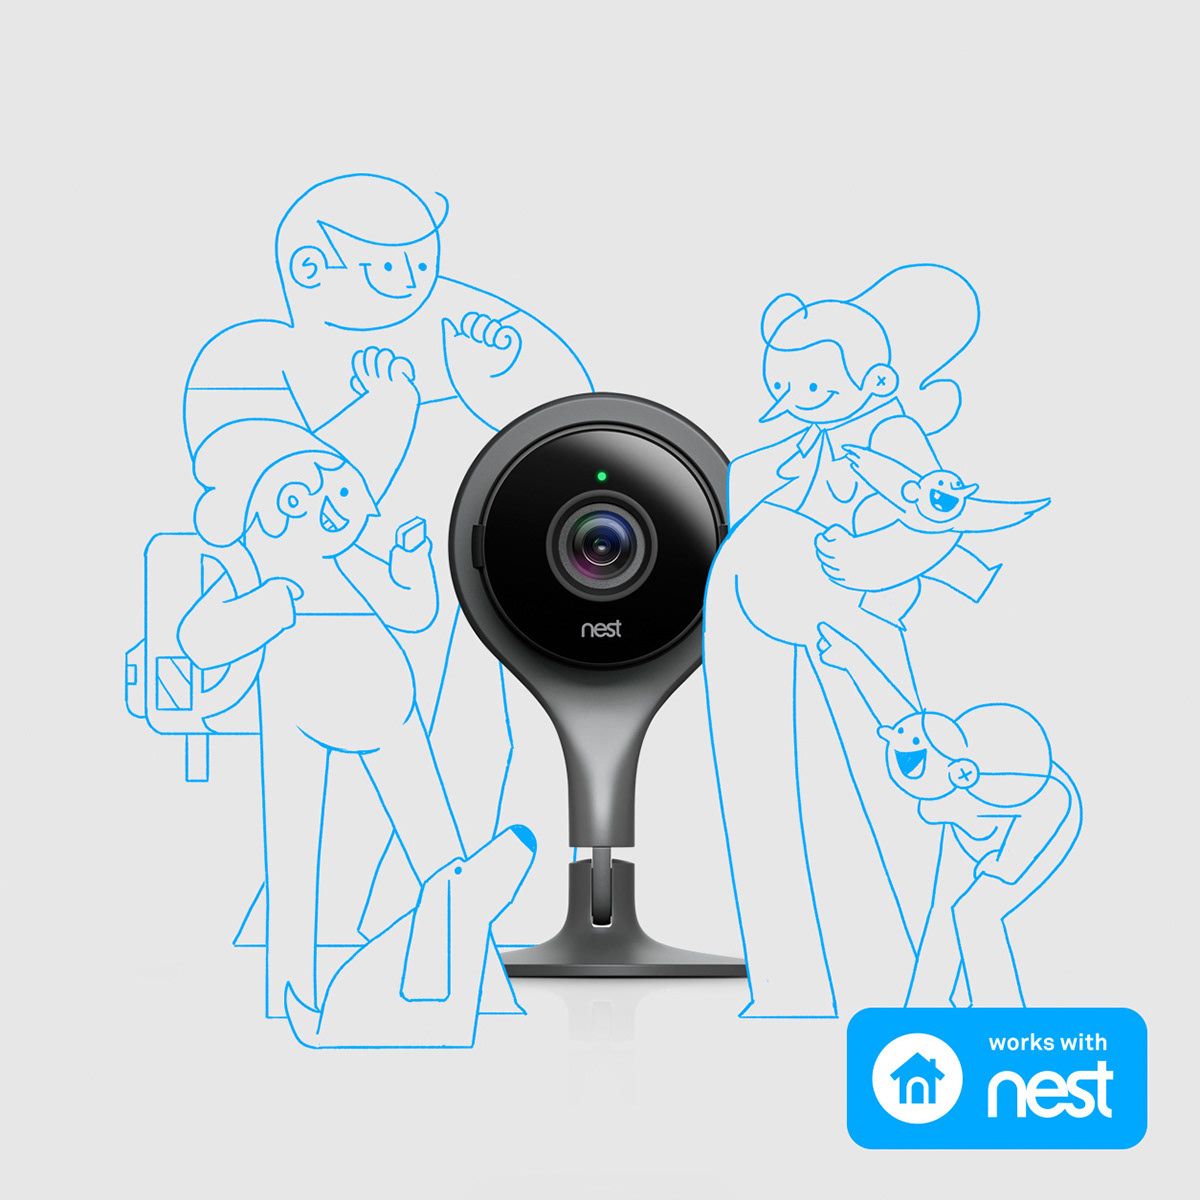 works with nest